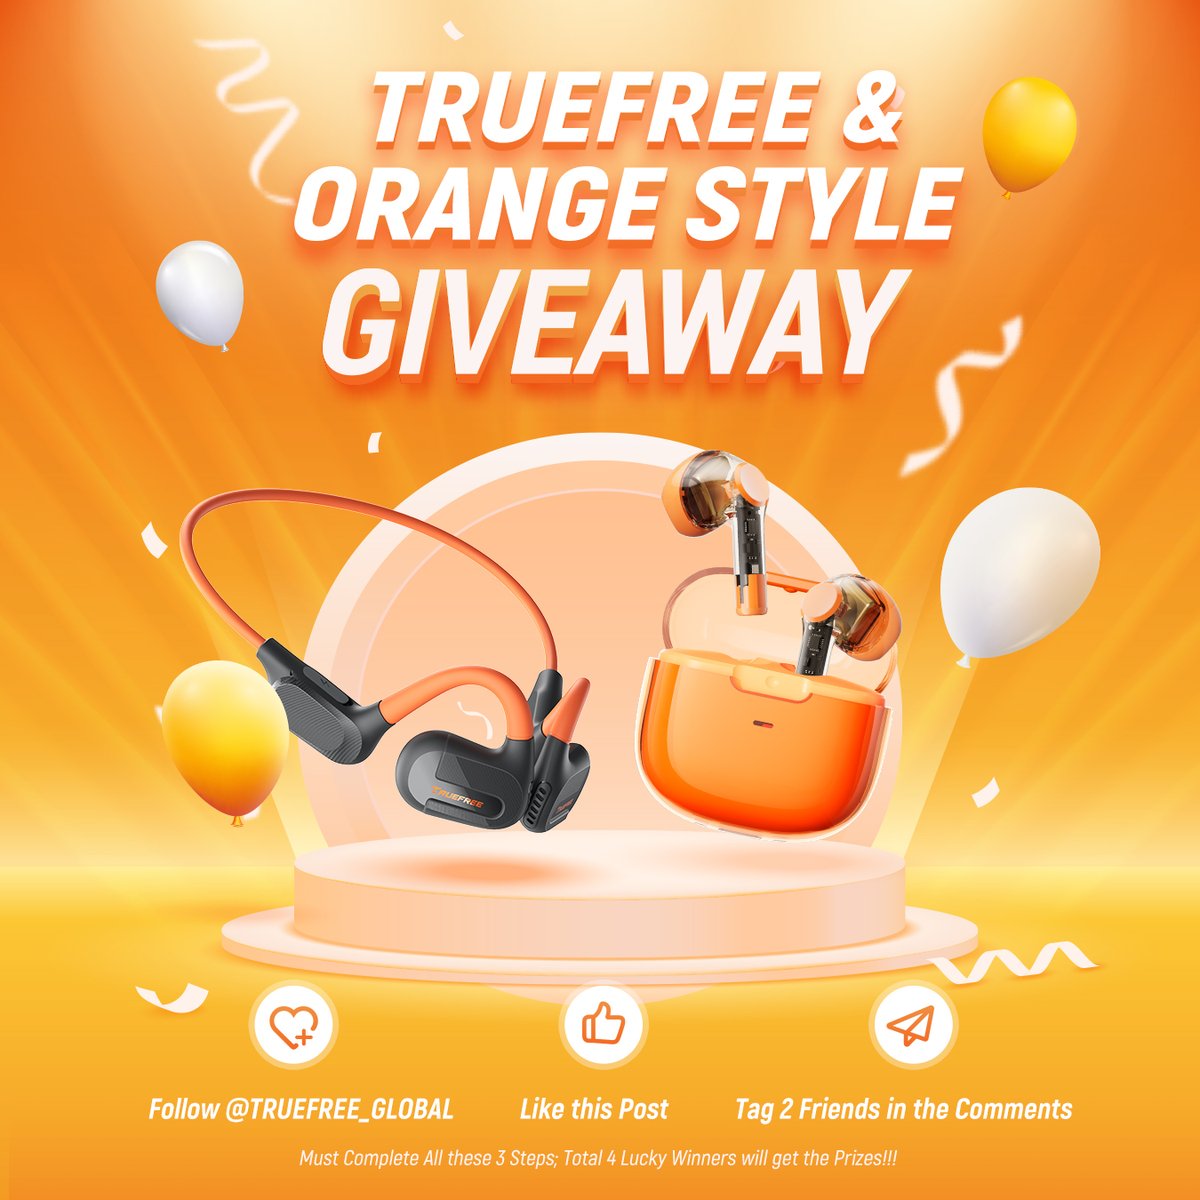 🍊TRUEFREE & ORANGE STYLE GIVEAWAY🍊 🧡Immerse yourself in the warm and energetic Orange Style~ 🎁Prizes: 2 x TRUEFREE F2 Open-ear Headphones/ 2 x TRUEFREE T3 Transparent Earbuds 👏Time Limited: May. 24 - 31. 2024 (PDT) #Giveaway #gifts #orange #cozy #TRUEFREE #sports